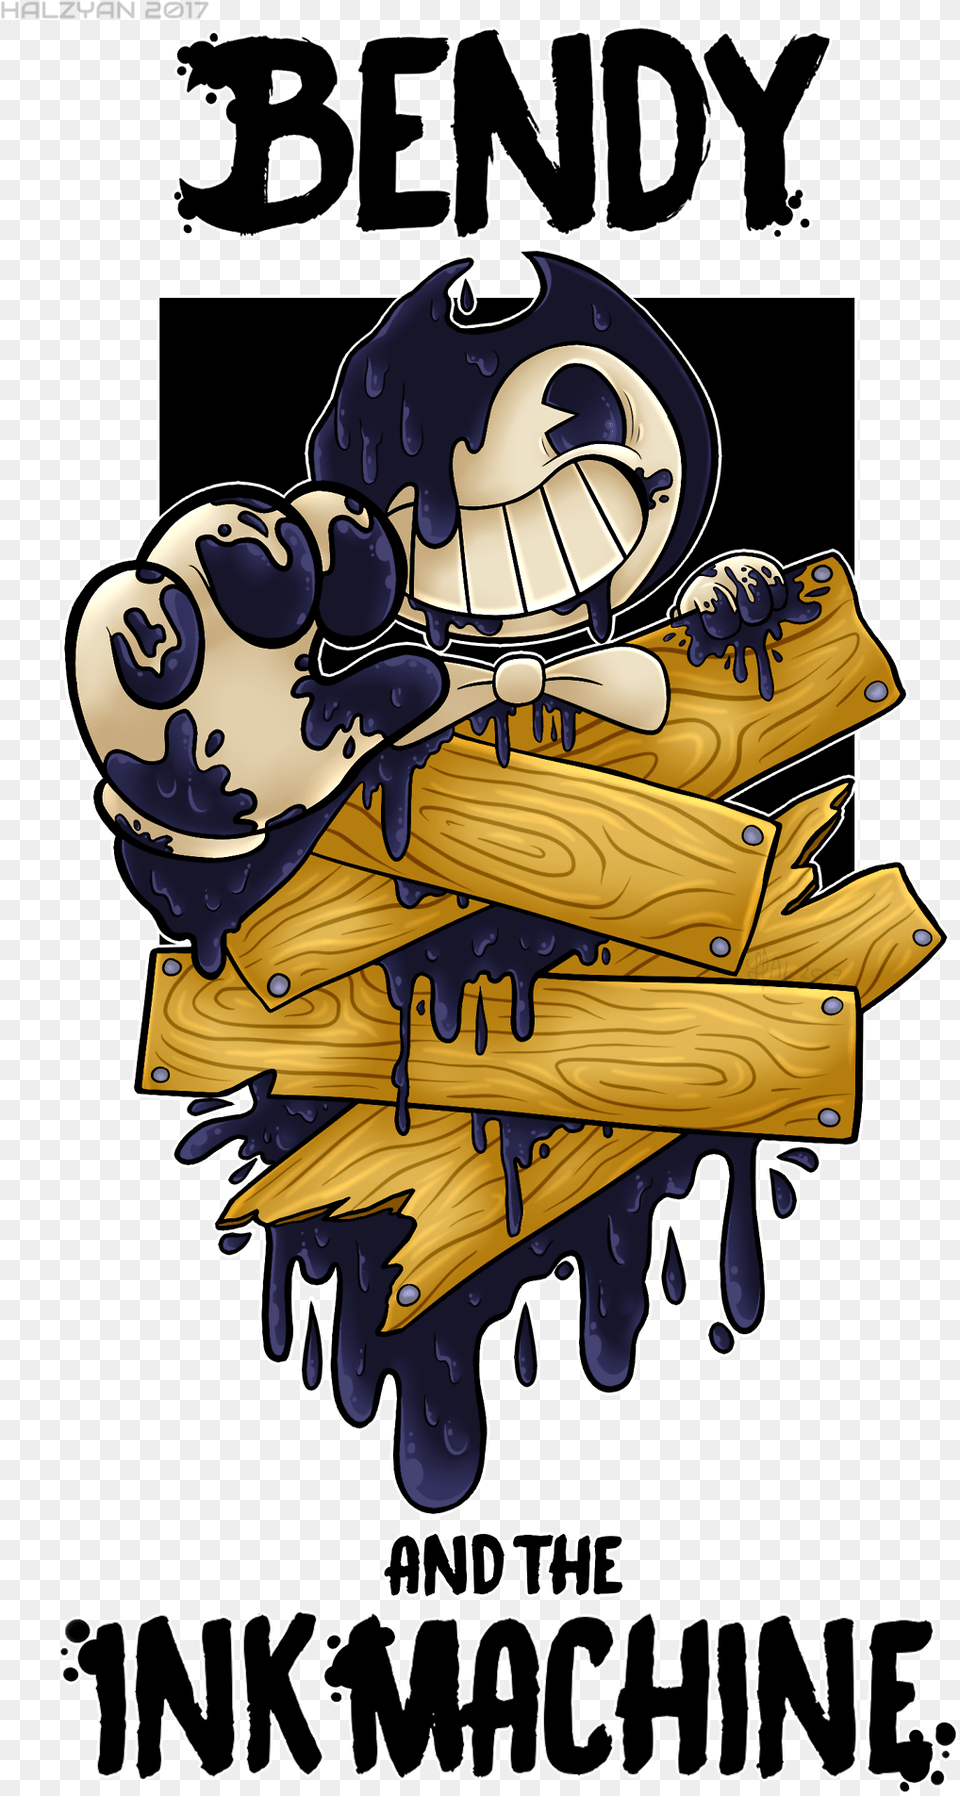 Bendy And The Ink Machine Wallpaper Iphone, Book, Publication, Advertisement, Poster Png Image